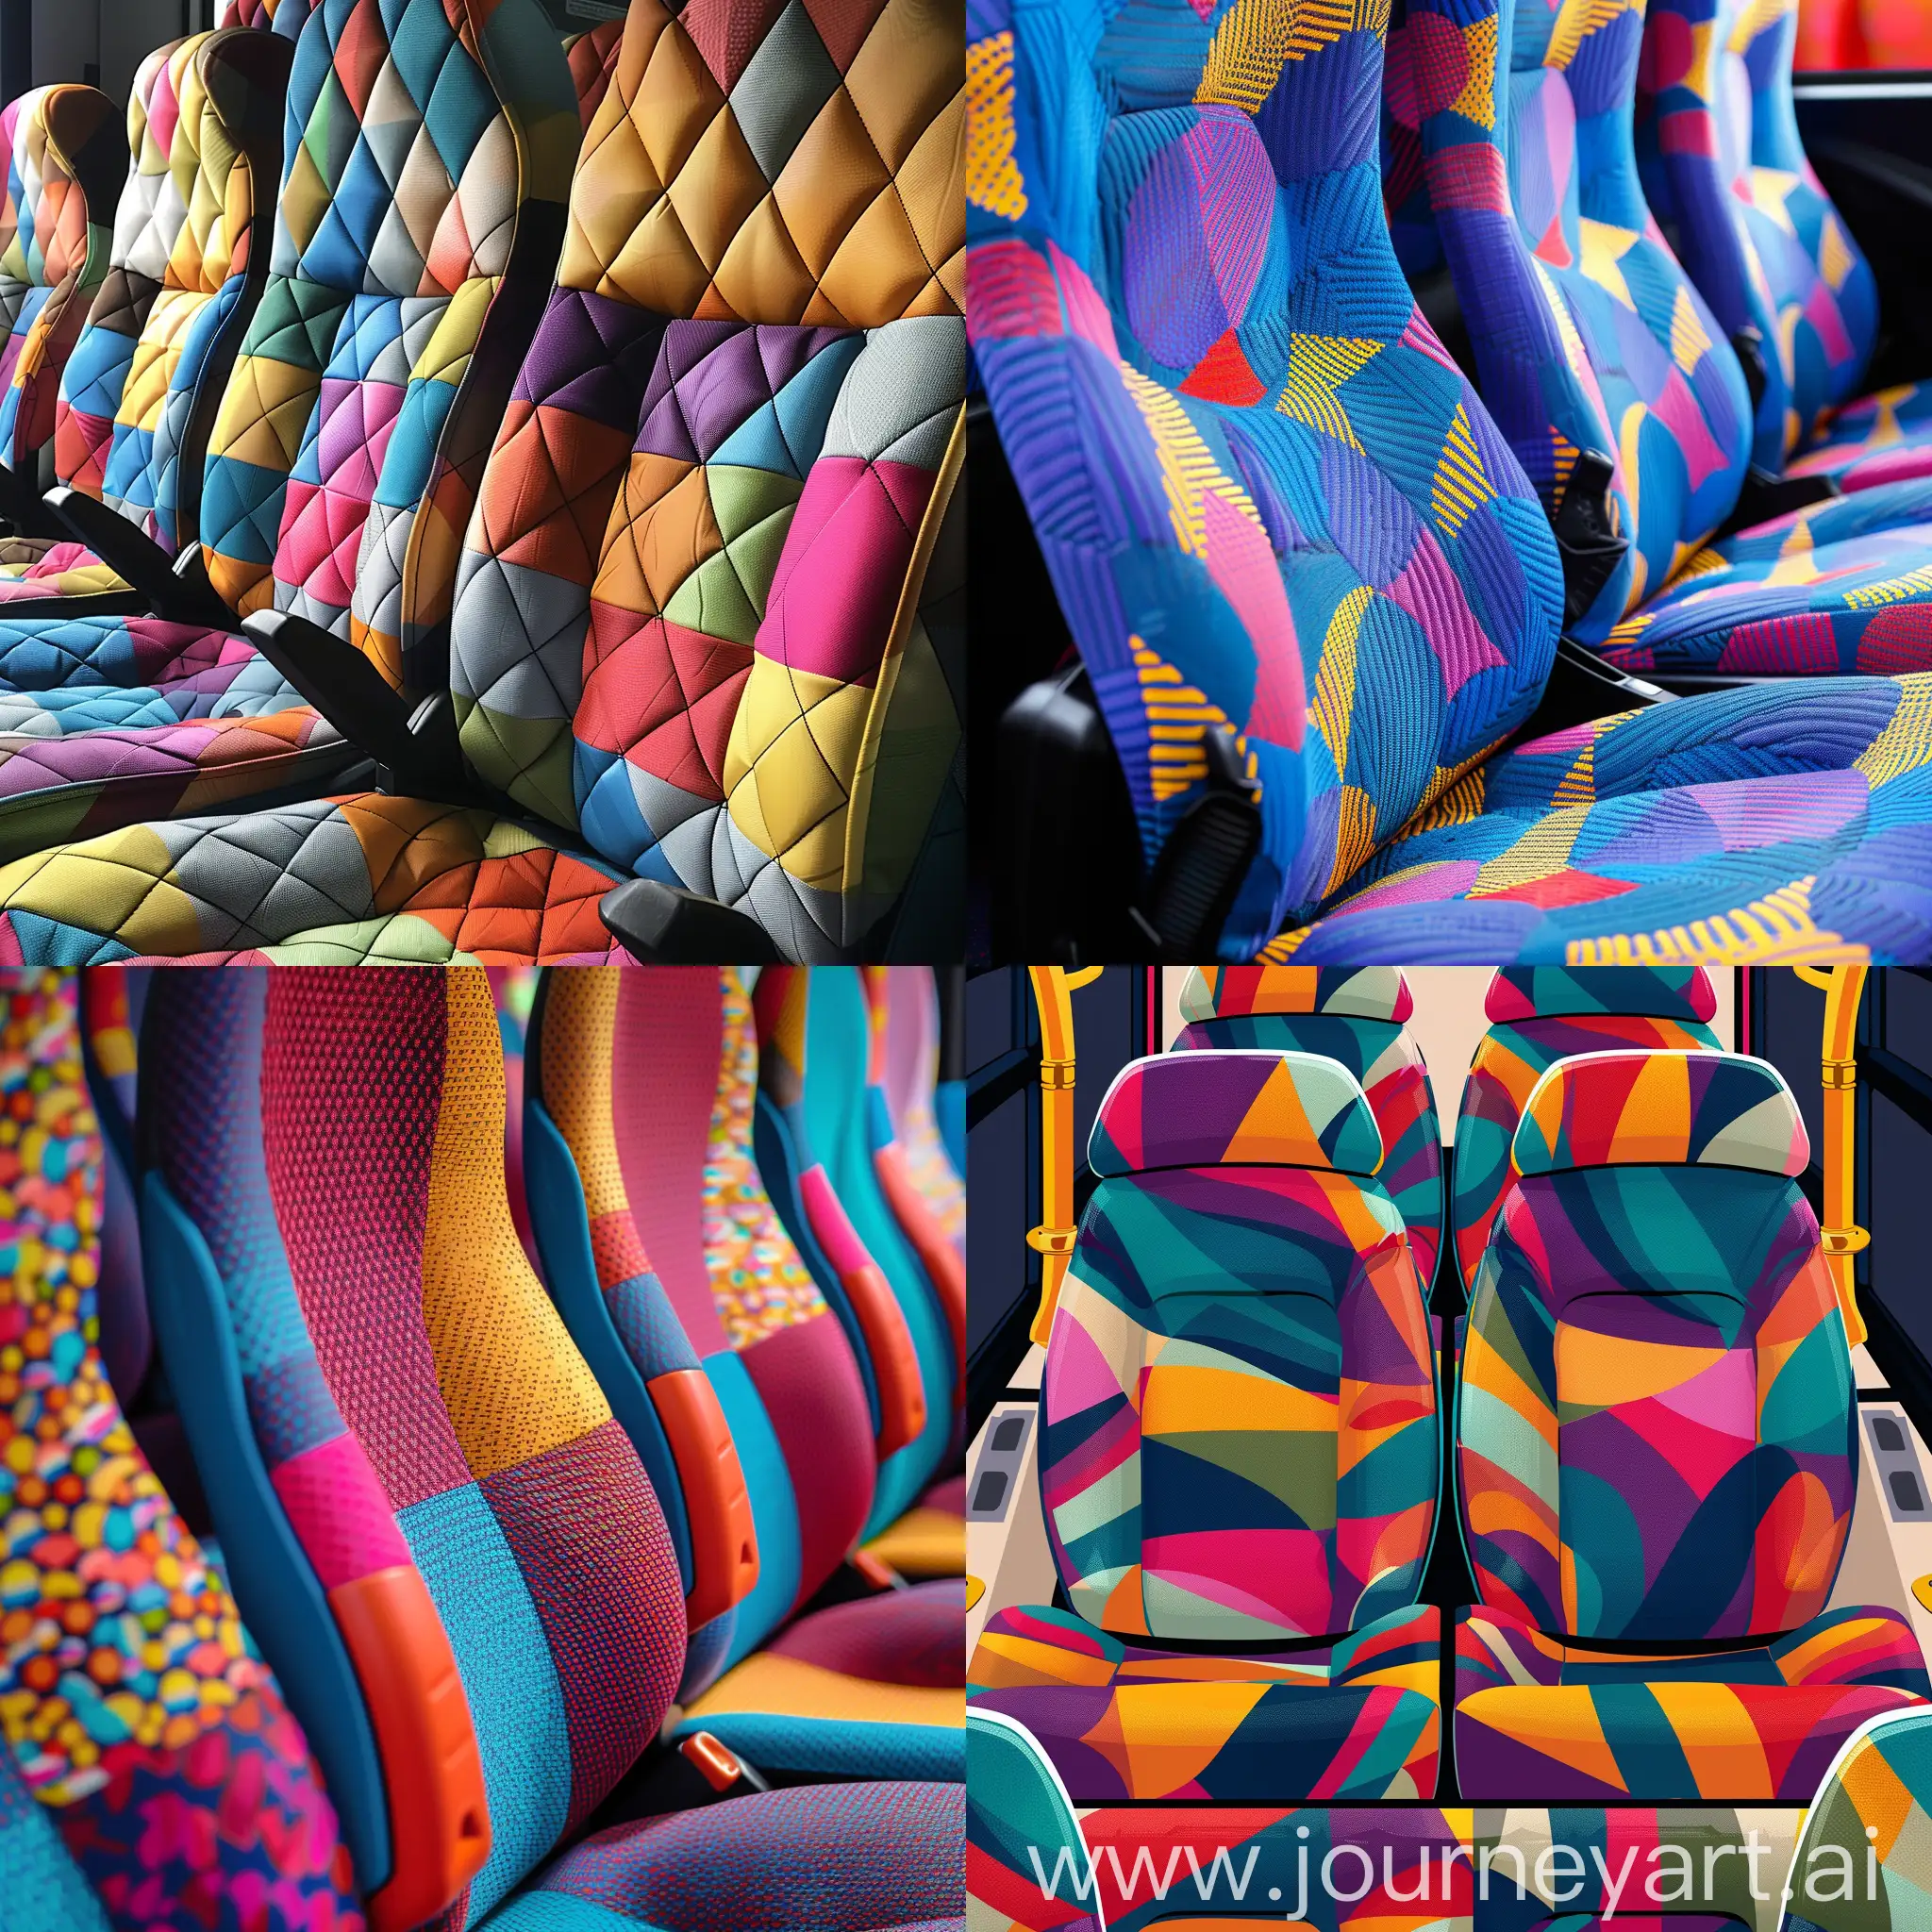 Vibrant-Seamless-Texture-of-Colorful-Bus-Seat-Pattern